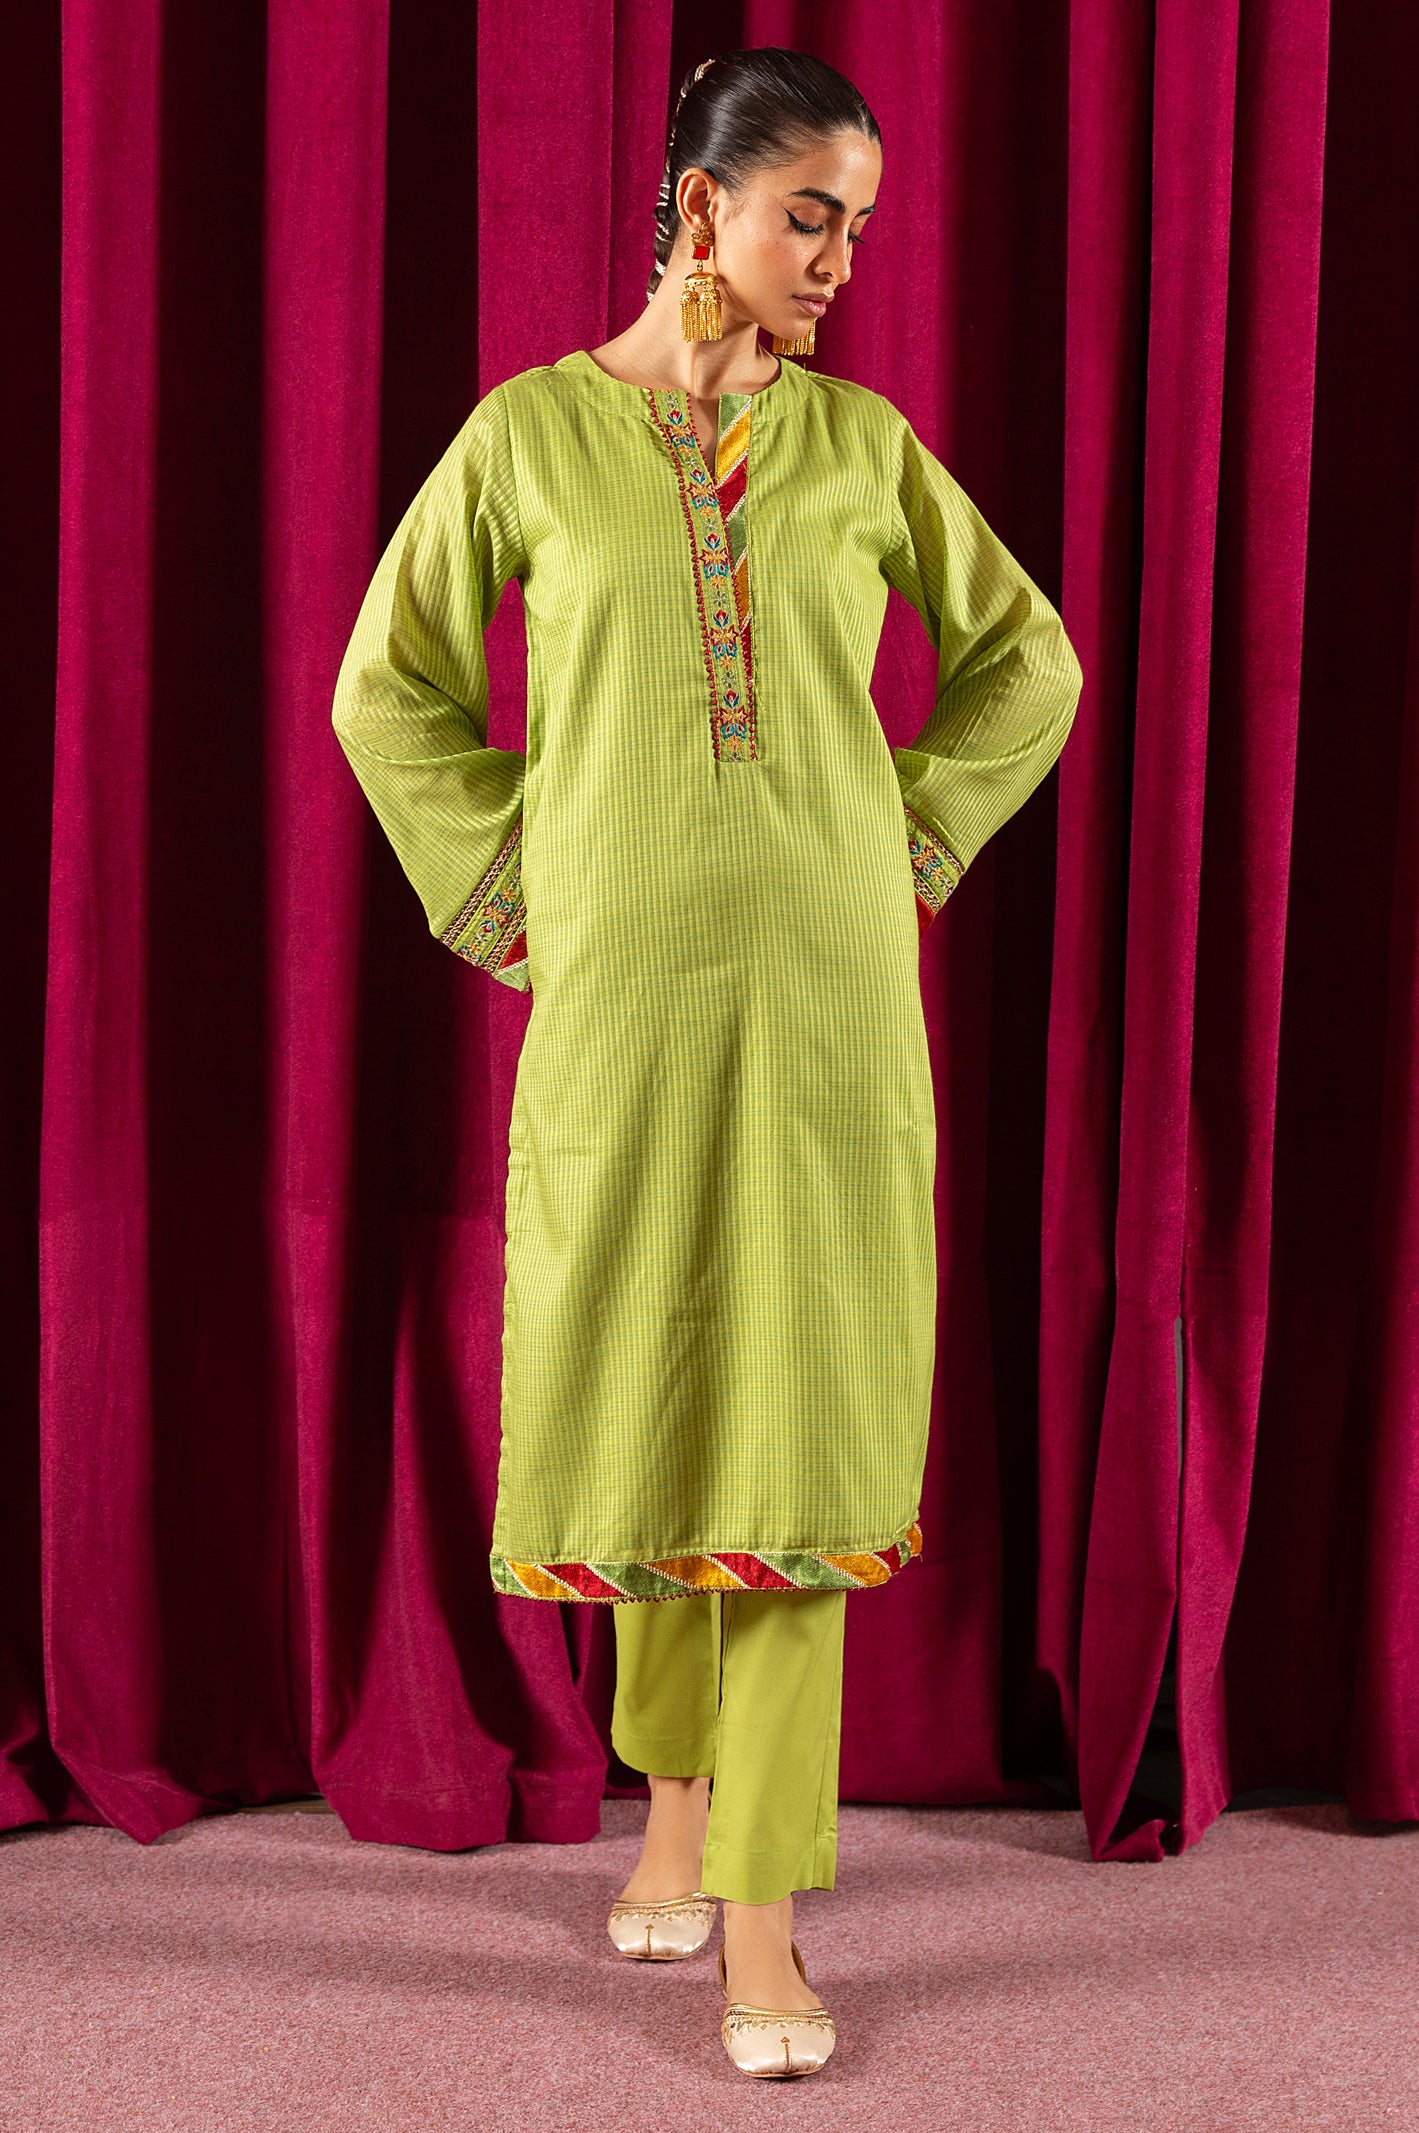 2PC Green Embroidered Suit From Diners